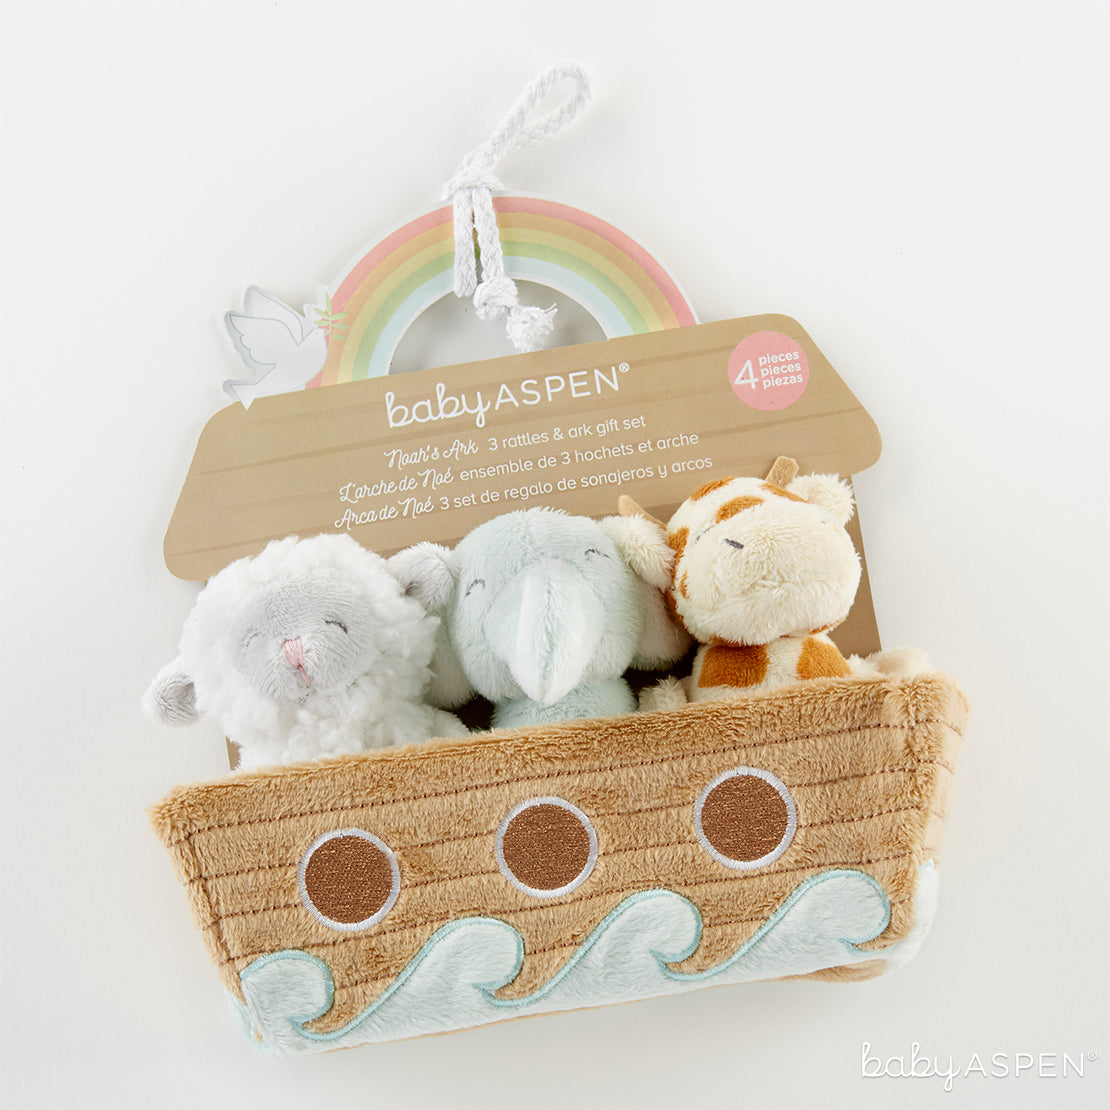 Noah's Ark Rattle Set | Holiday Gift Guide: Top 10 Baby Picks for 2018 | Baby Aspen